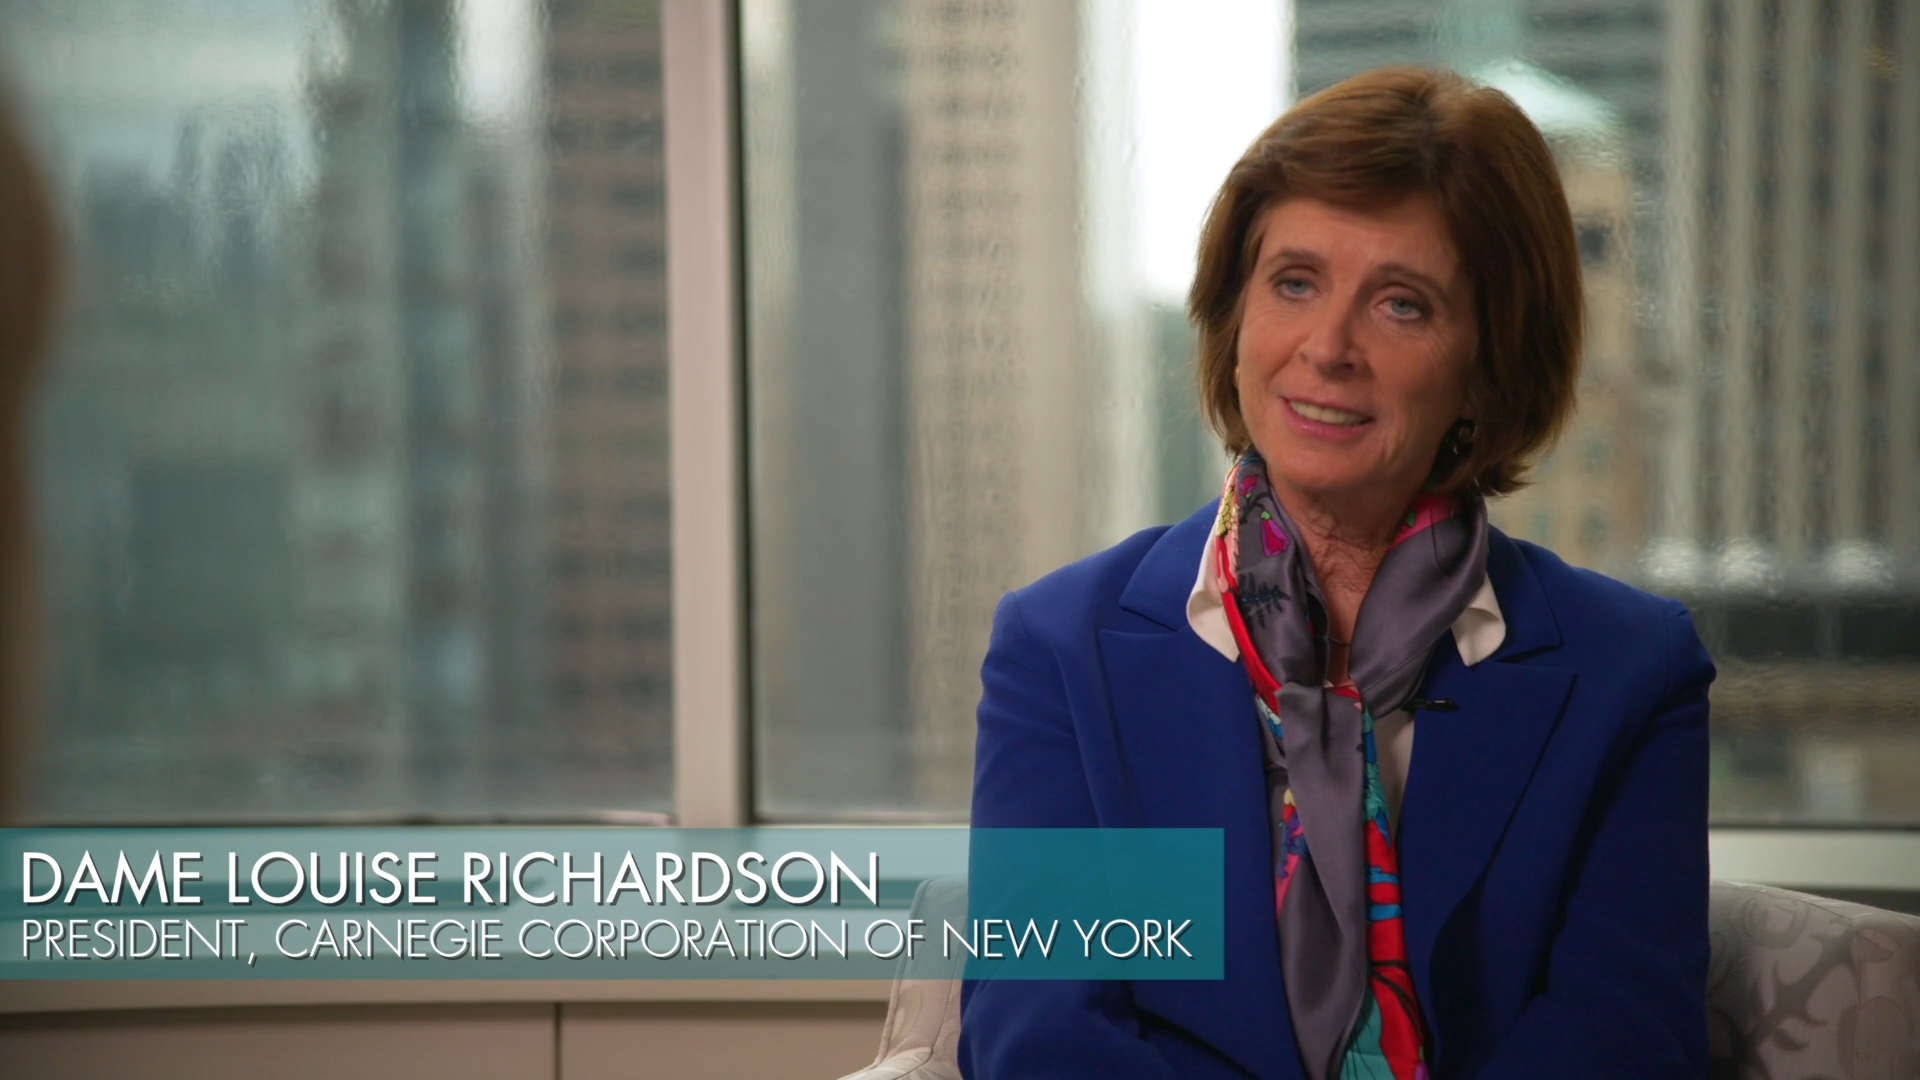 This preview of a Carnegie Conversation between Dame Louise Richardson, who joined Carnegie Corporation of New York as its 13th president in January 2023, and Emmy Award–winning journalist and long-serving Corporation trustee Judy Woodruff focuses on Richardson’s personal story — growing up as a tomboy in rural Ireland and the role philanthropy played in her own education as the first in her family to go to college. Full interview here: https://www.youtube.com/watch?v=fL1N6sbN-kA